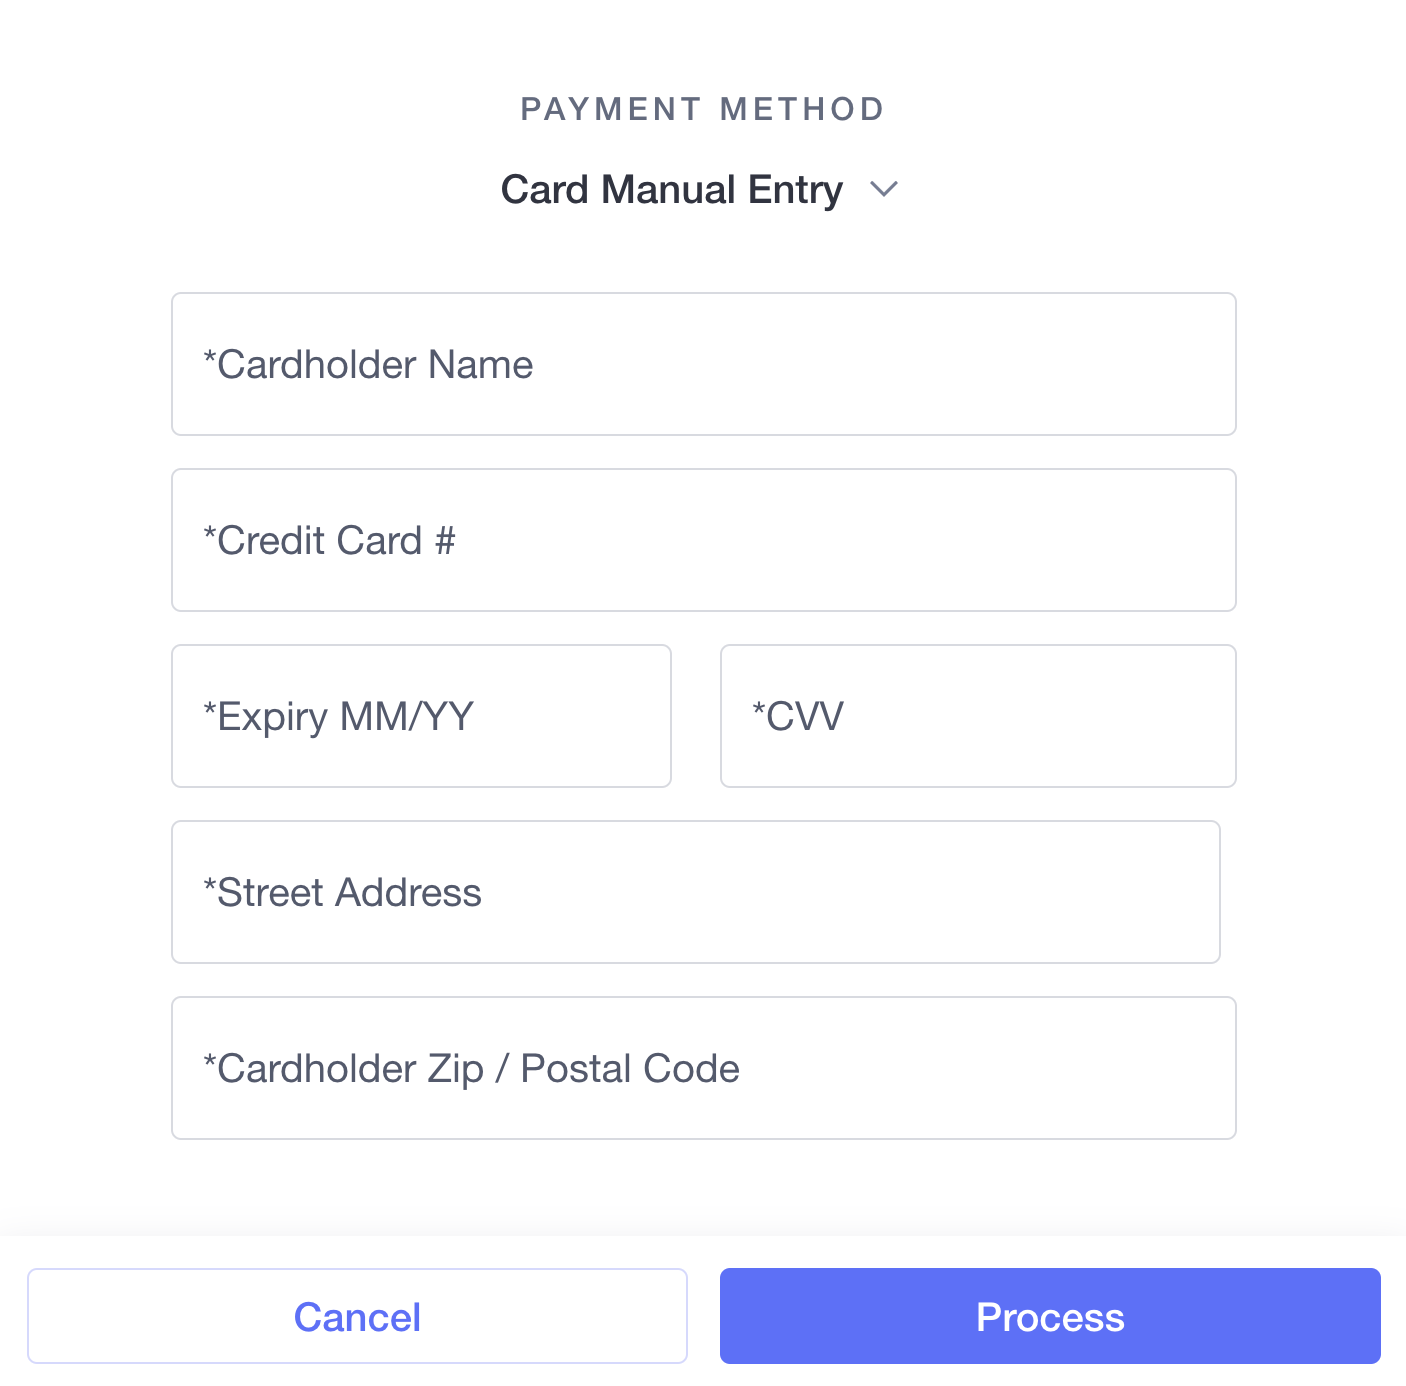 card manual entry form with cancel and process buttons